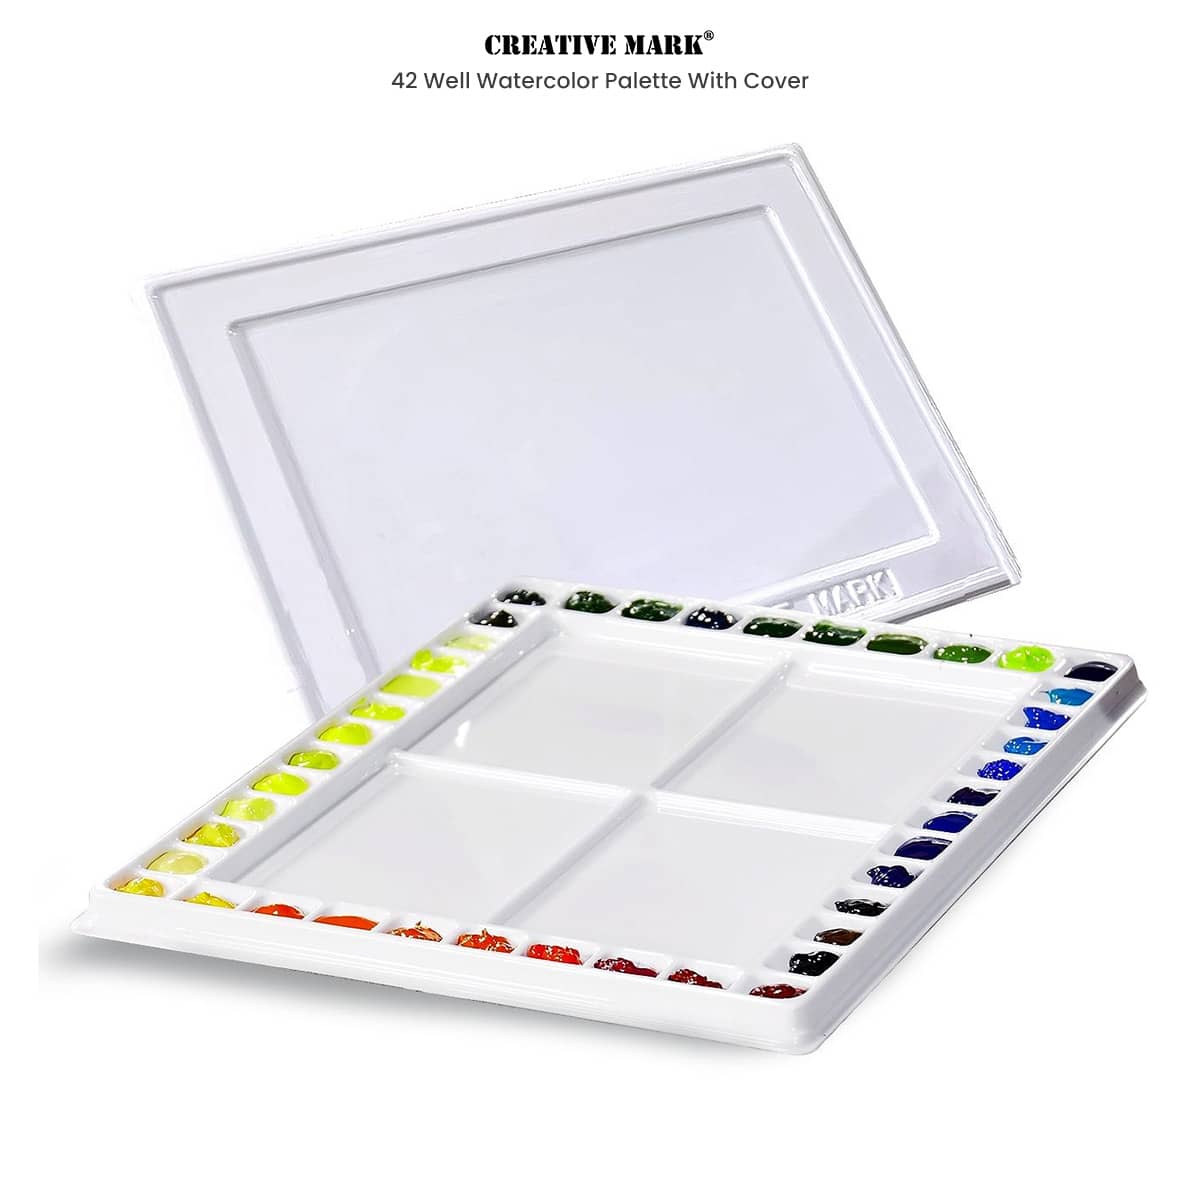 Empty Watercolor Palette with Lid by Dugato, 24+13 Half Pans with Fold-Out  Palette, Large Mixing Area, Metal Tin Box for Watercolor Acrylic Oil DIY